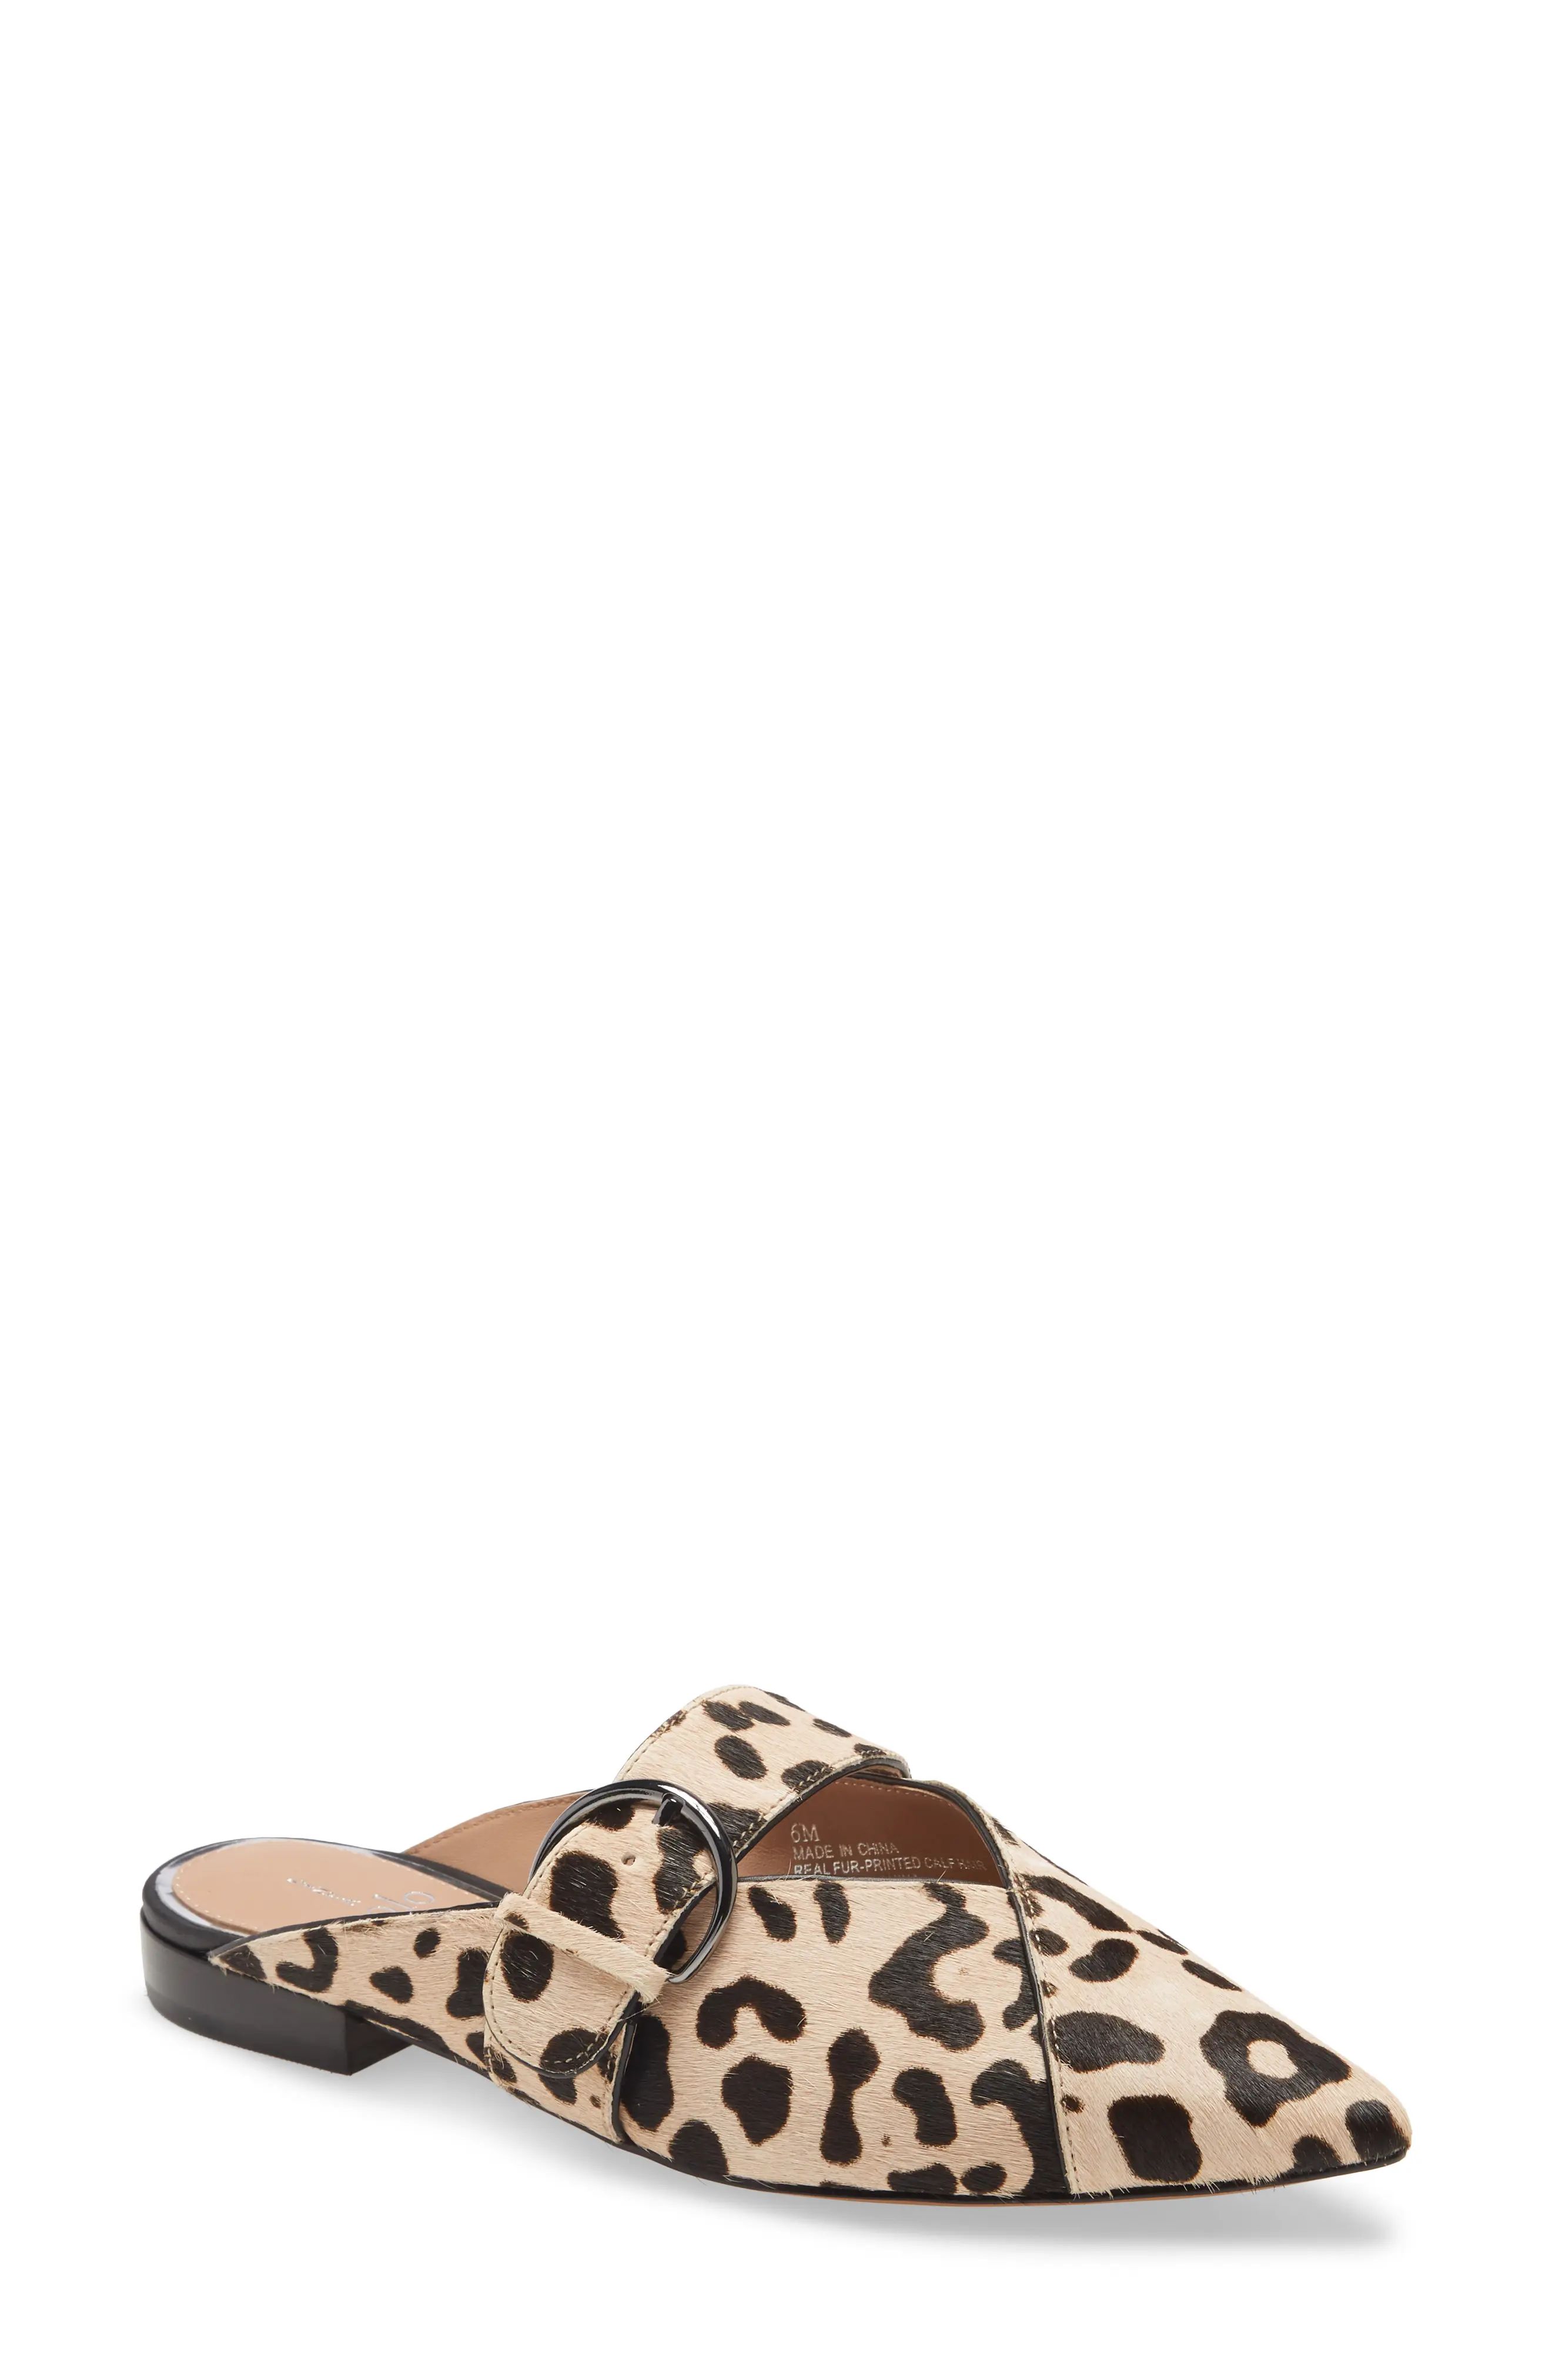 Linea Paolo Athea Genuine Calf Hair Pointed Toe Mule, Size 10 in Leopard Print Calf Hair at Nordstro | Nordstrom